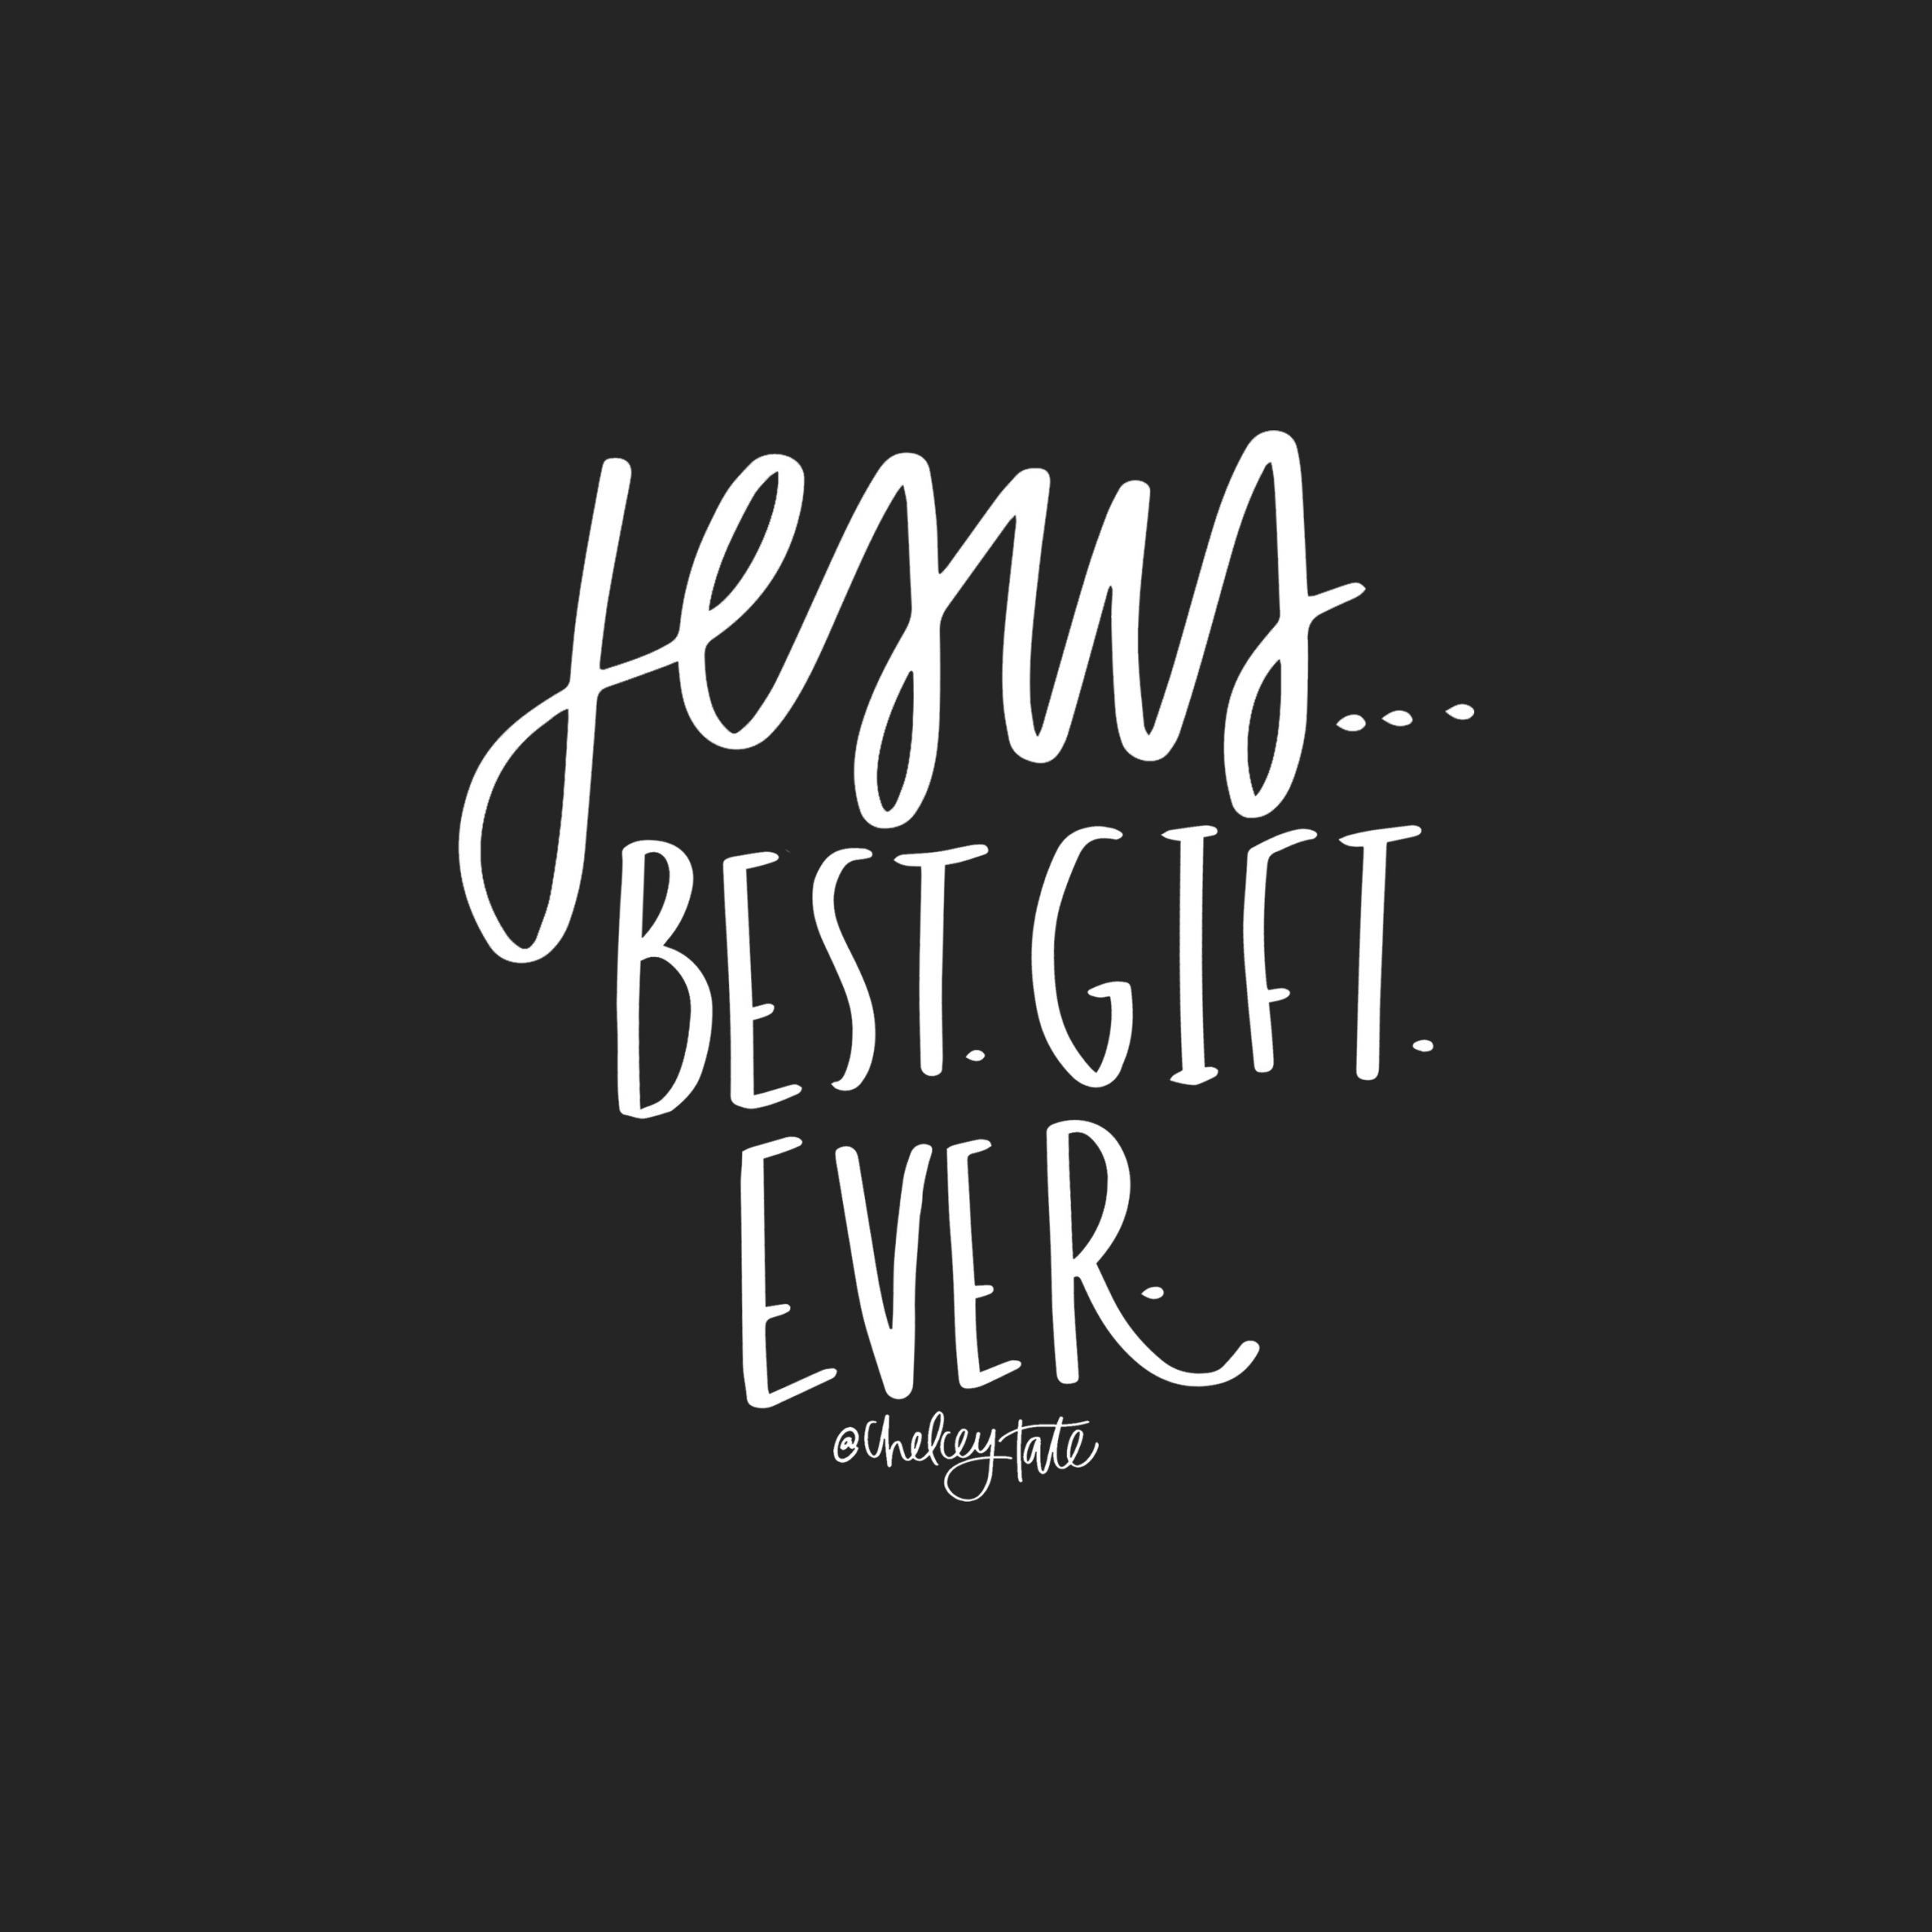 Christmas Jesus Quote
 Jesus Best Gift Ever Christian Christmas quote